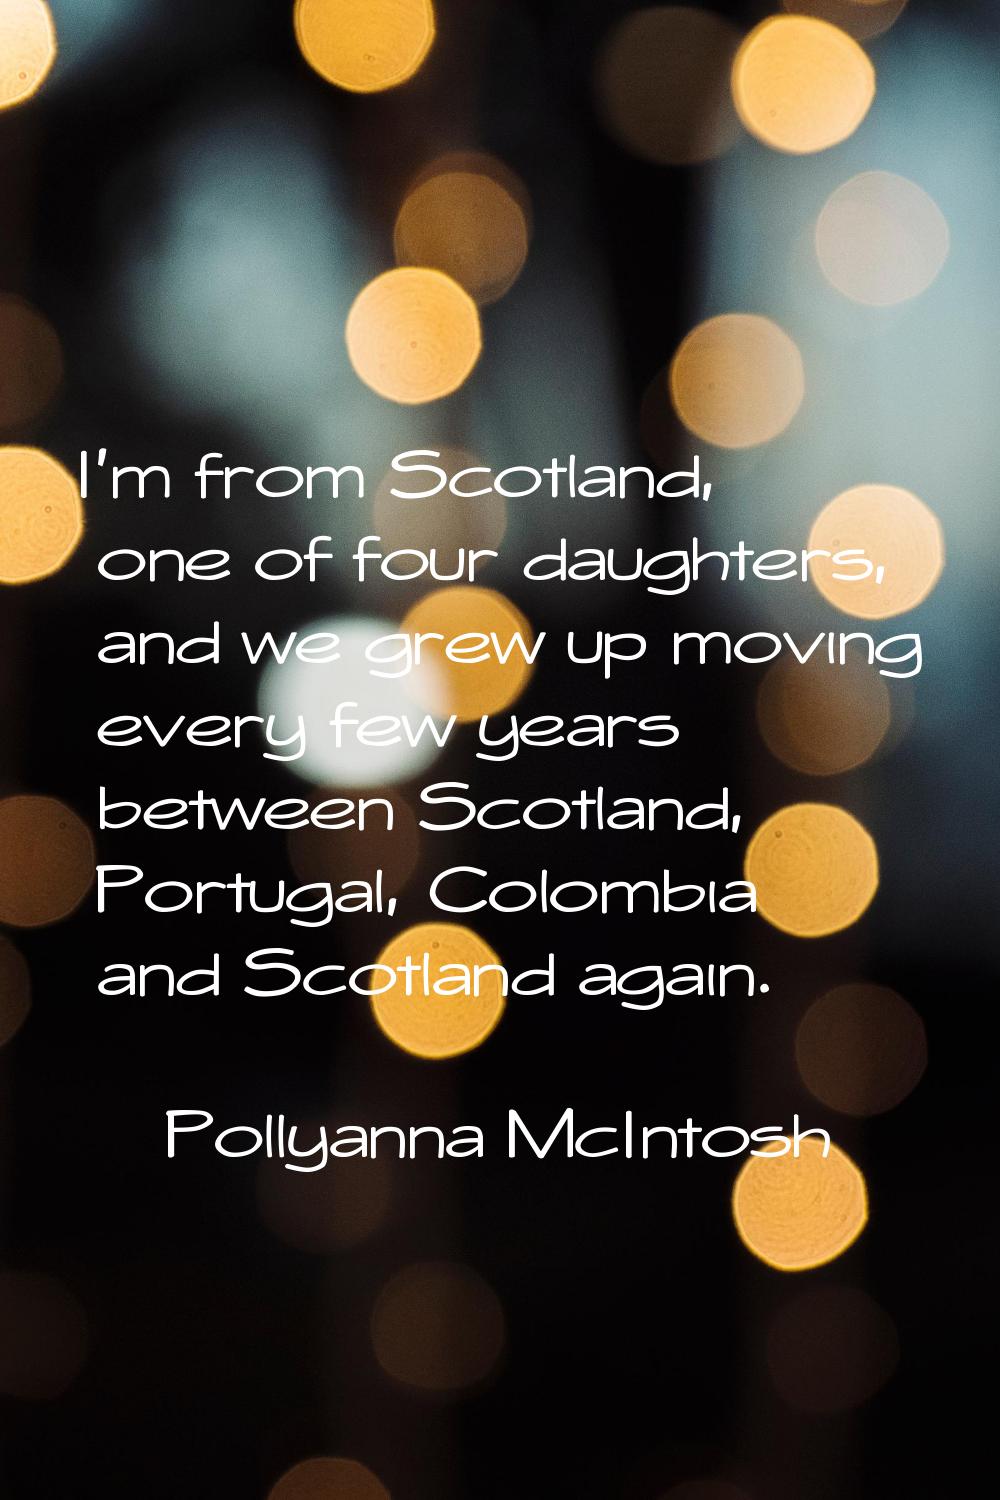 I'm from Scotland, one of four daughters, and we grew up moving every few years between Scotland, P